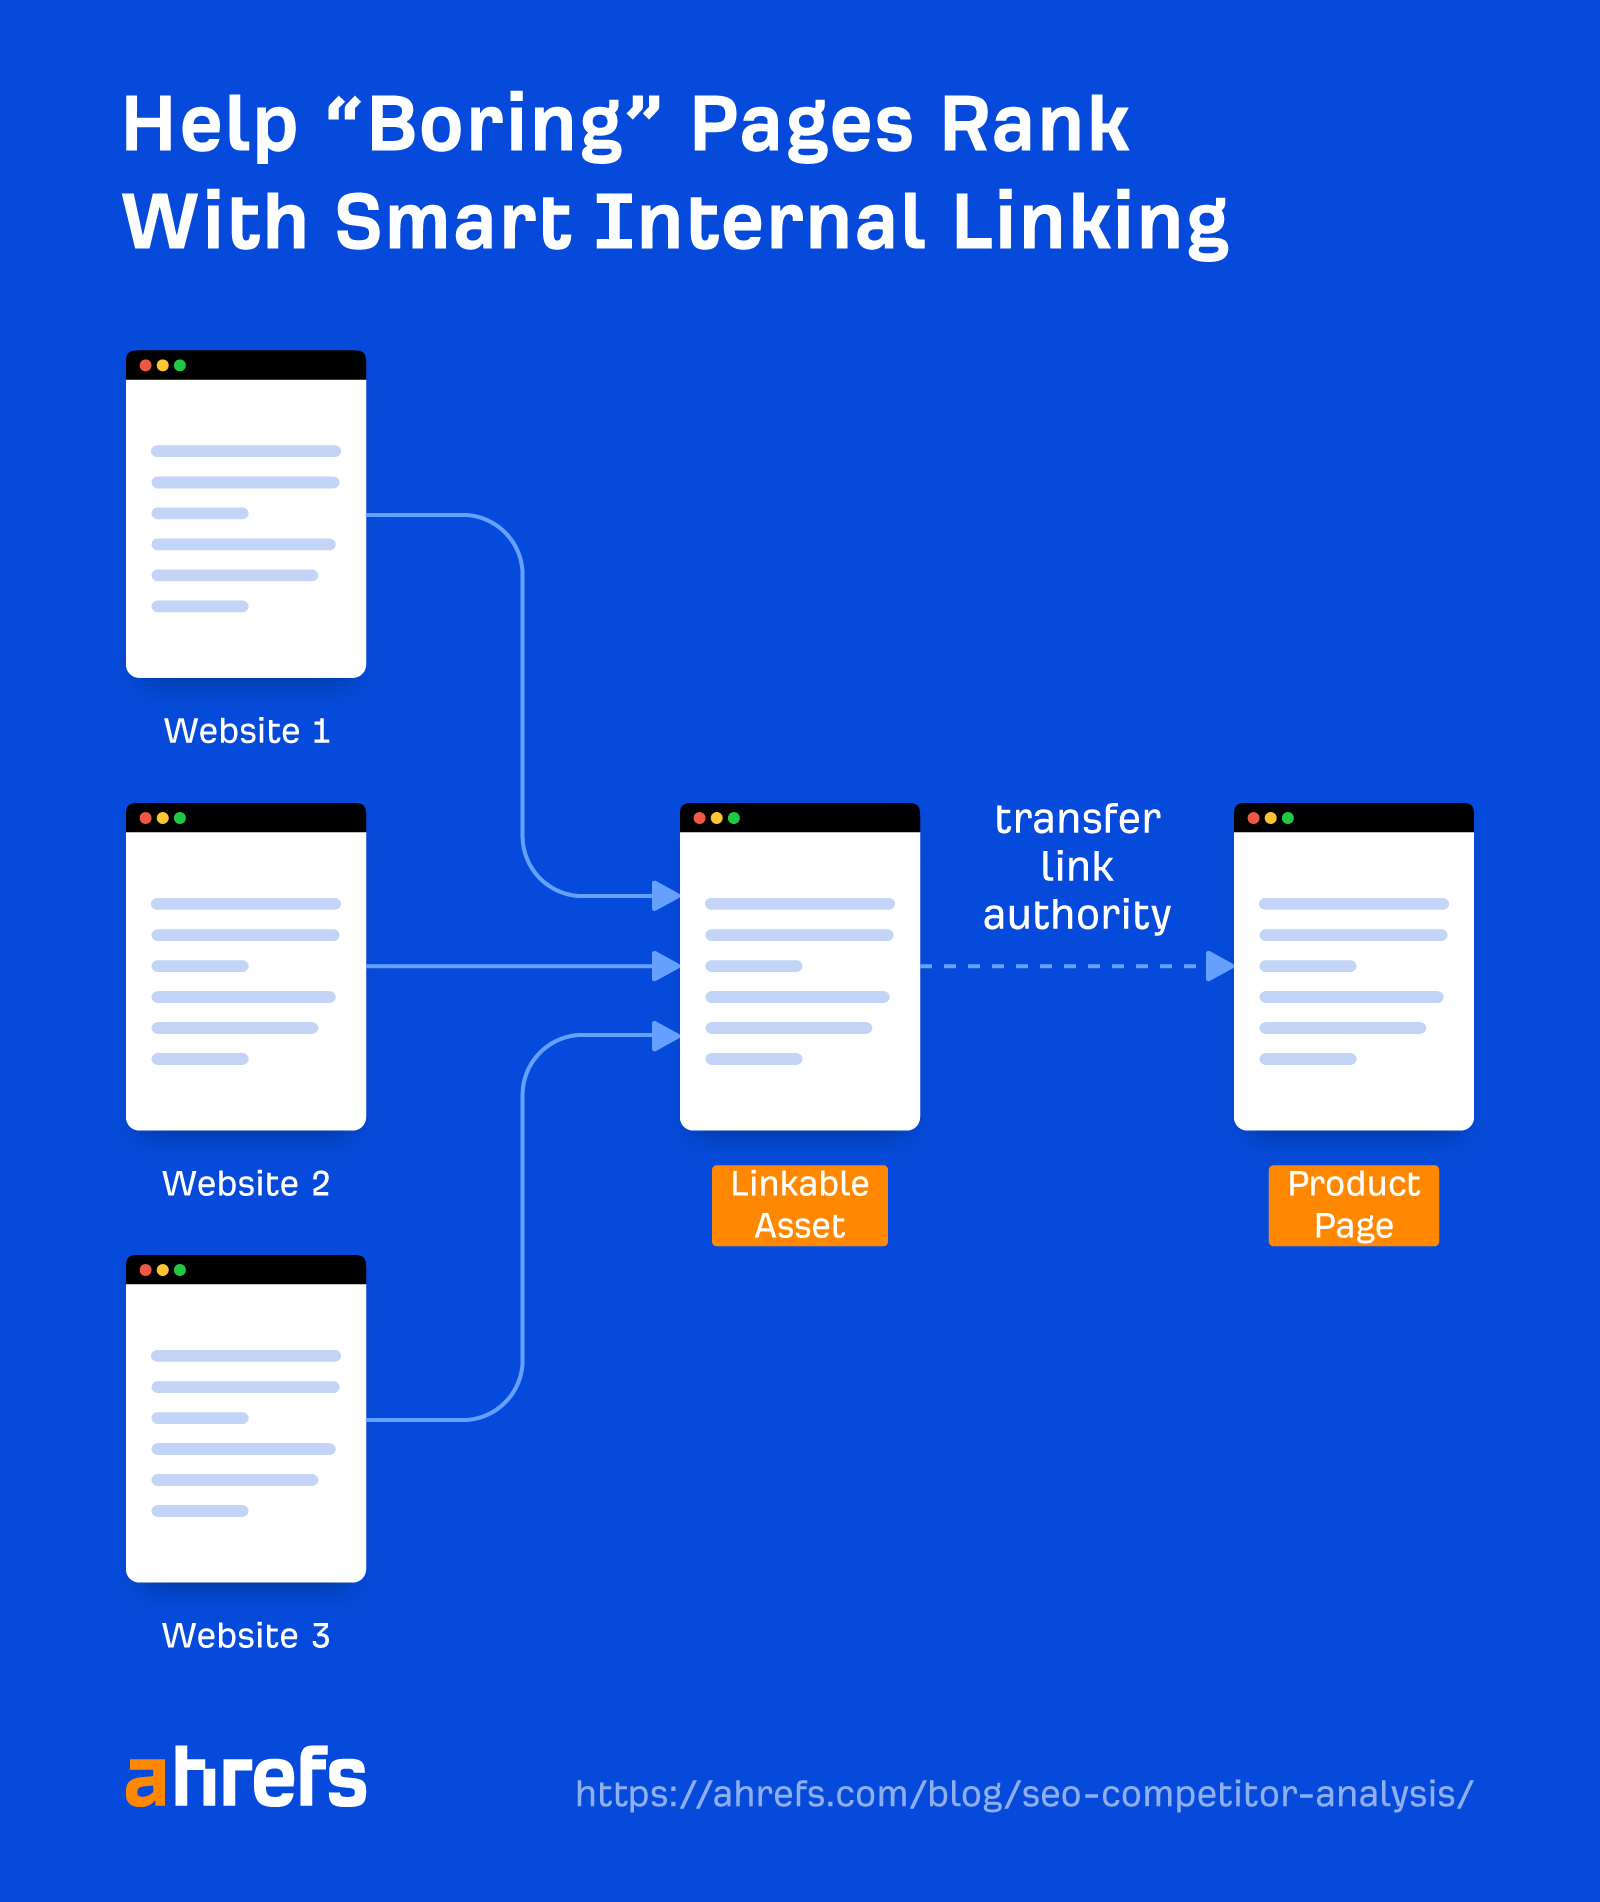 Use smart internal linking to help your boring pages rank